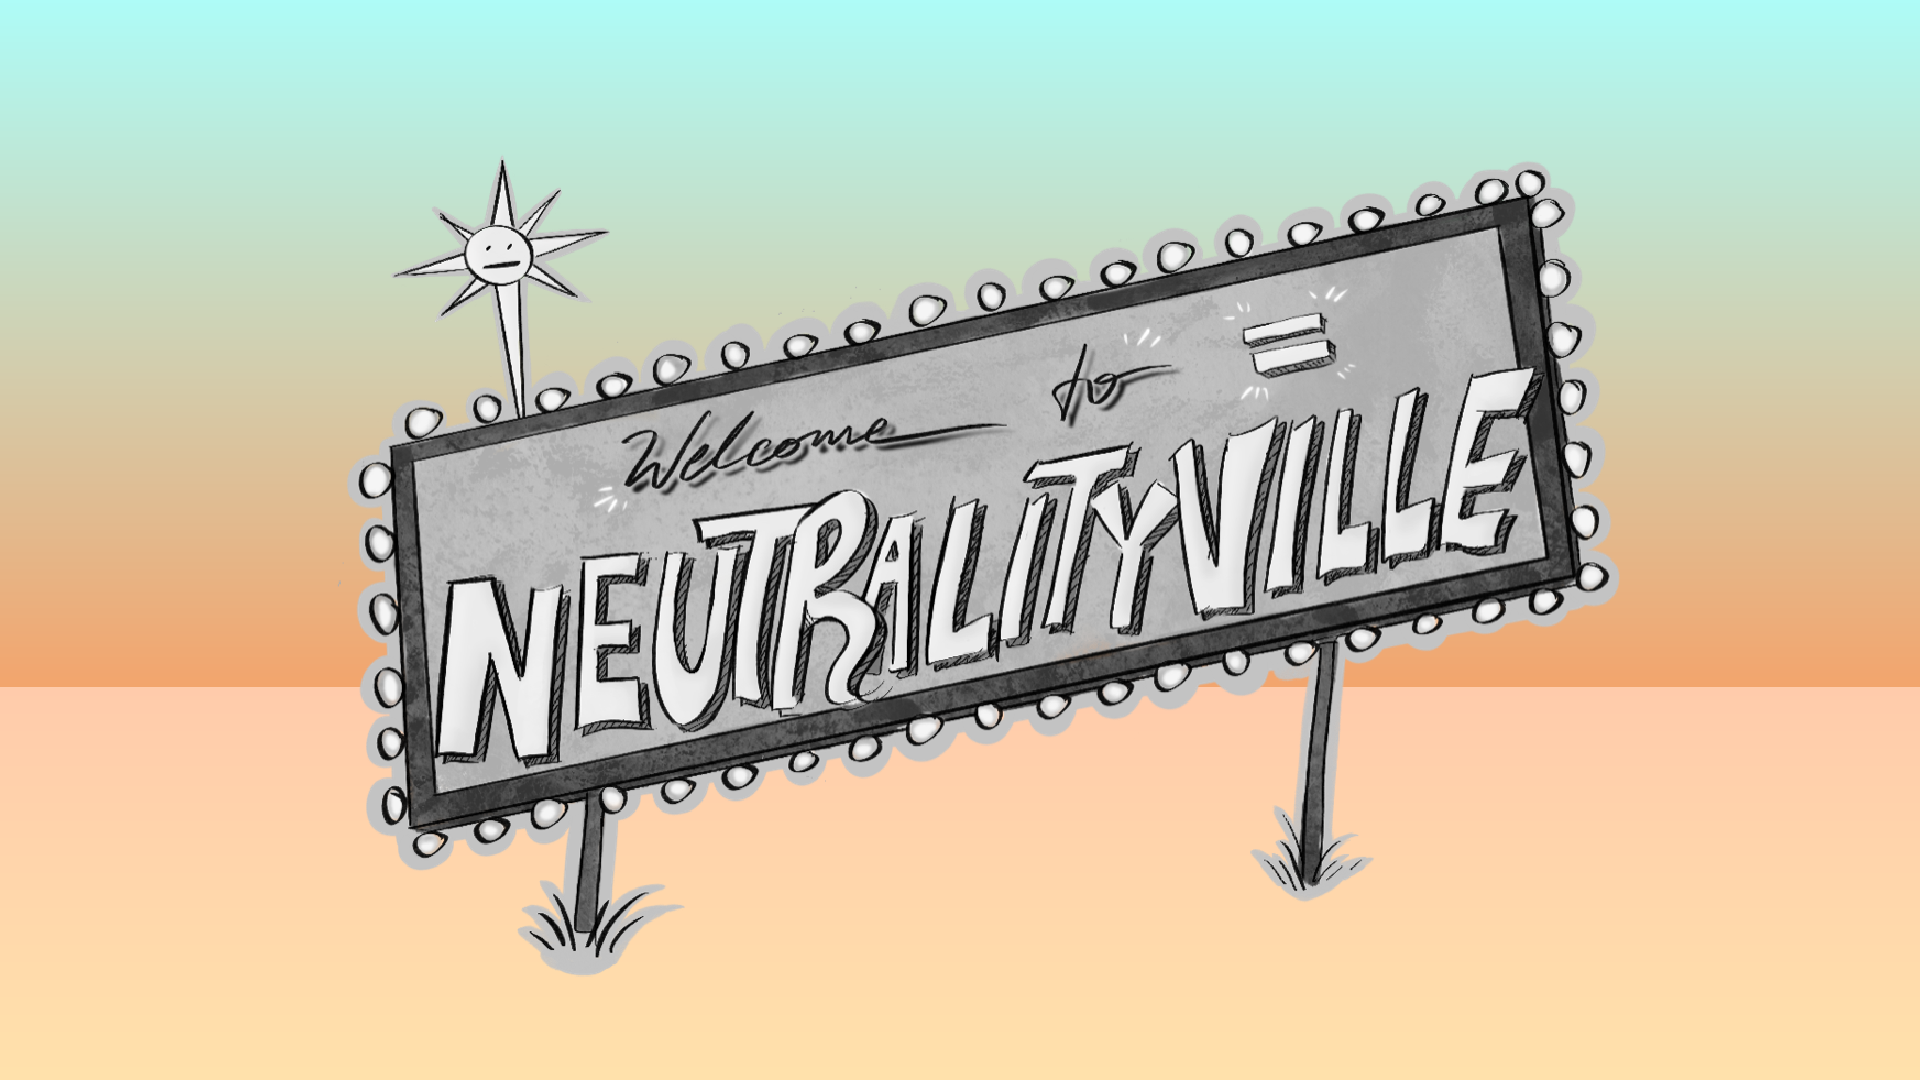 Grey sign that reads “Welcome to Neutralityville.”